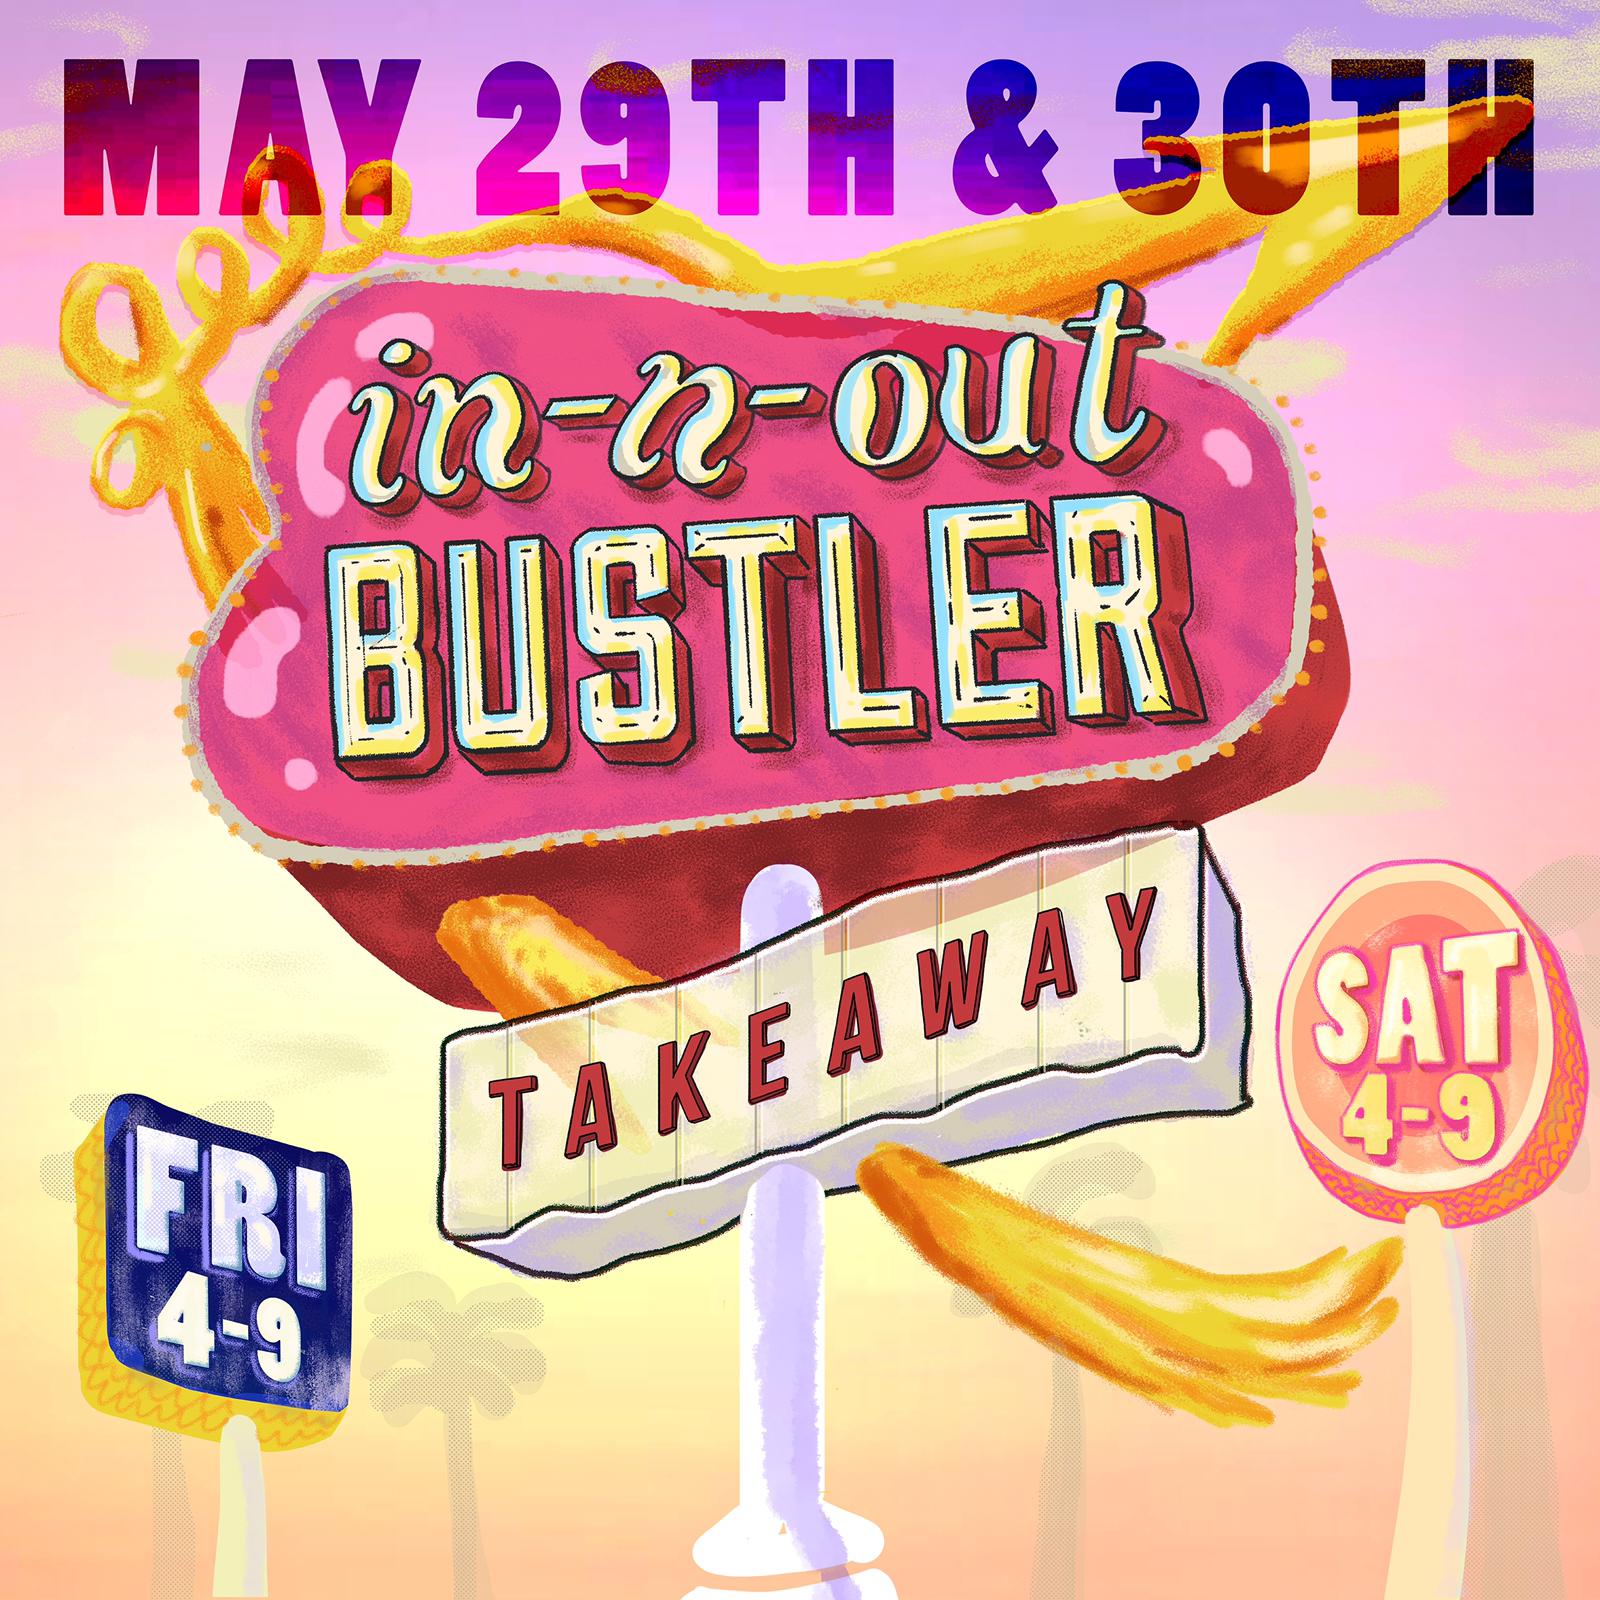 Bustler Market returns with an all new In and Out service